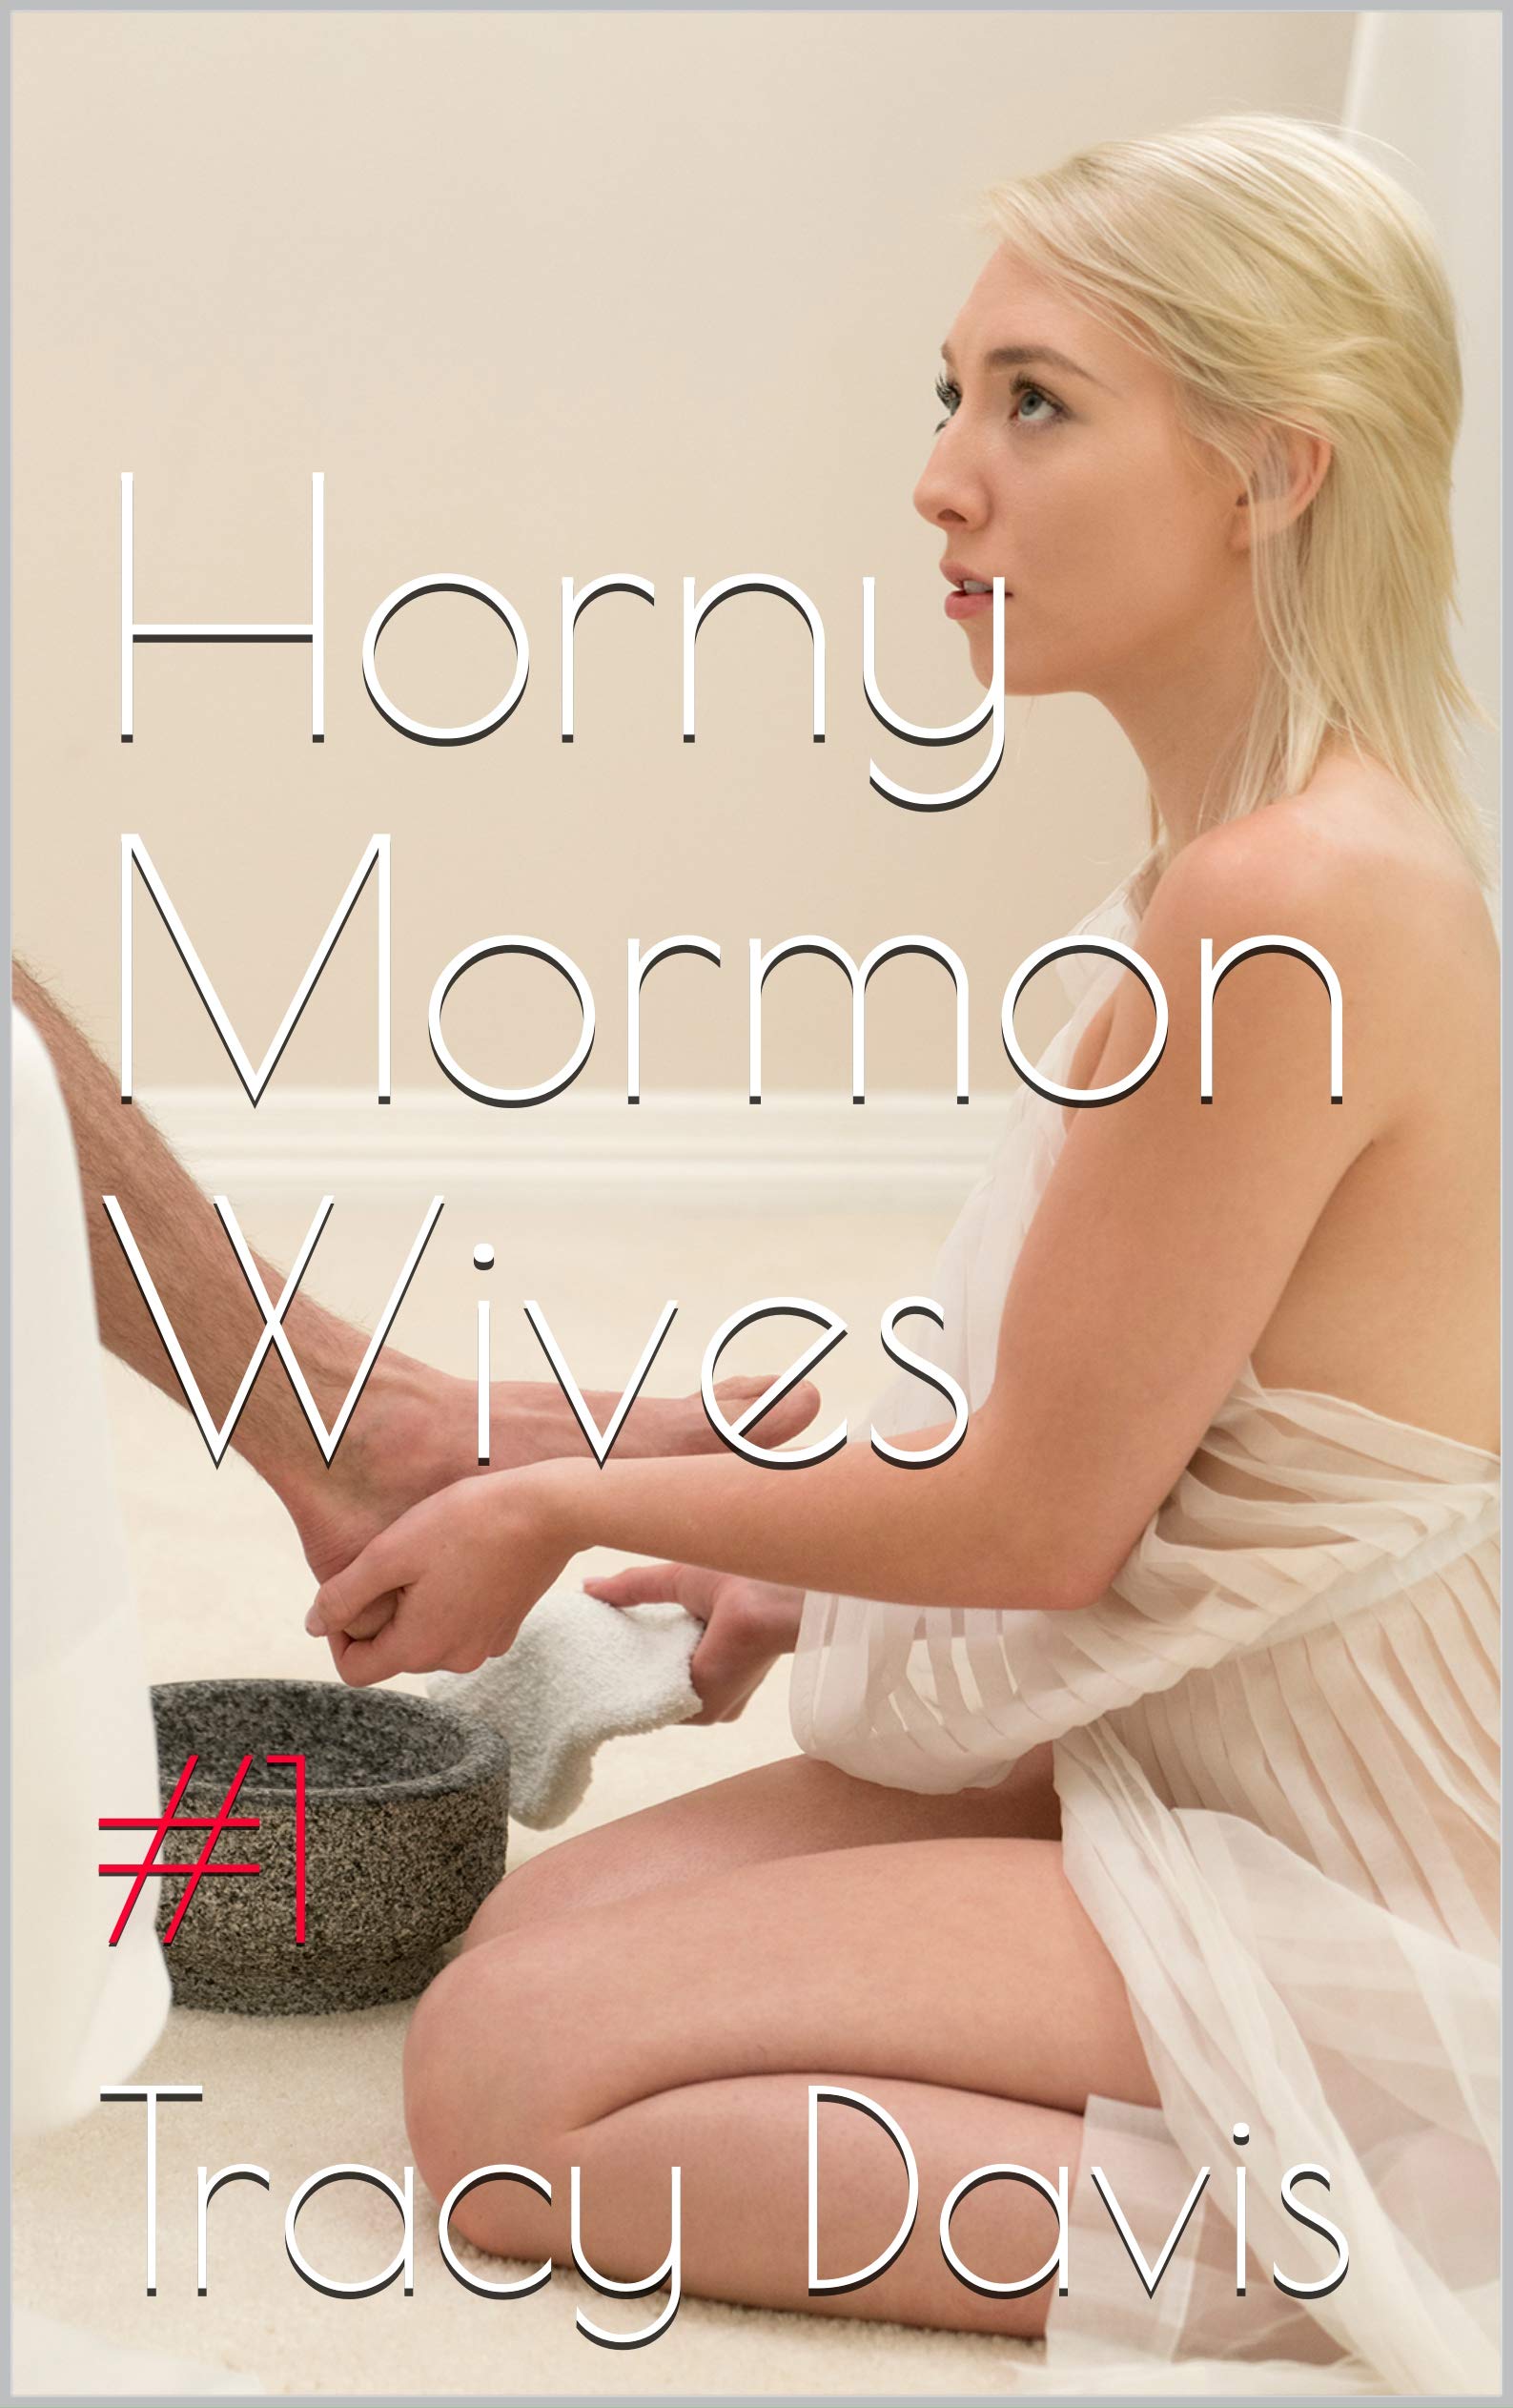 christopher saindon recommends Hot Mormon Wife